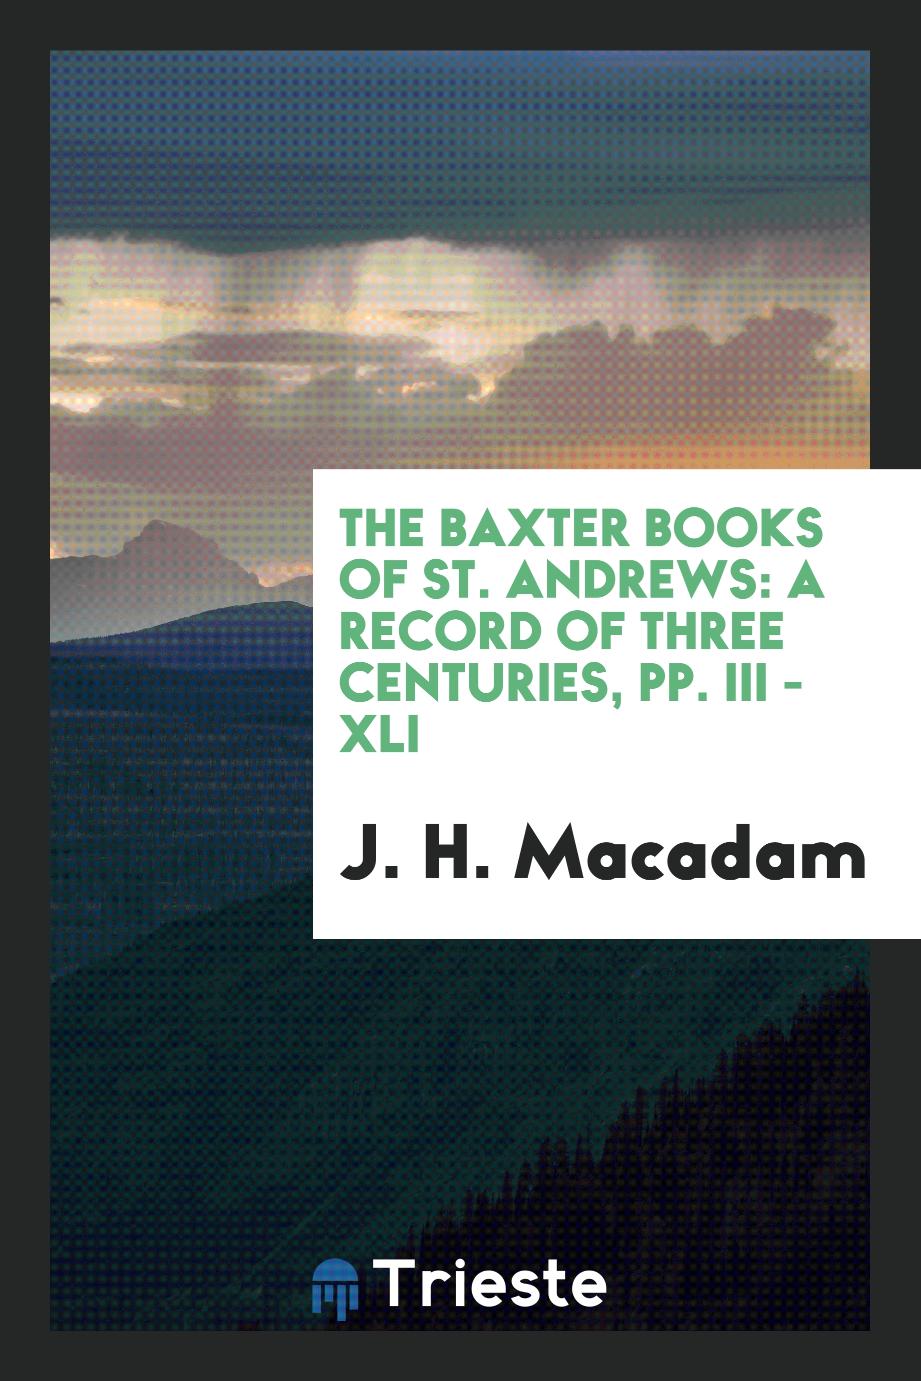 The Baxter Books of St. Andrews: A Record of Three Centuries, pp. iii - xli